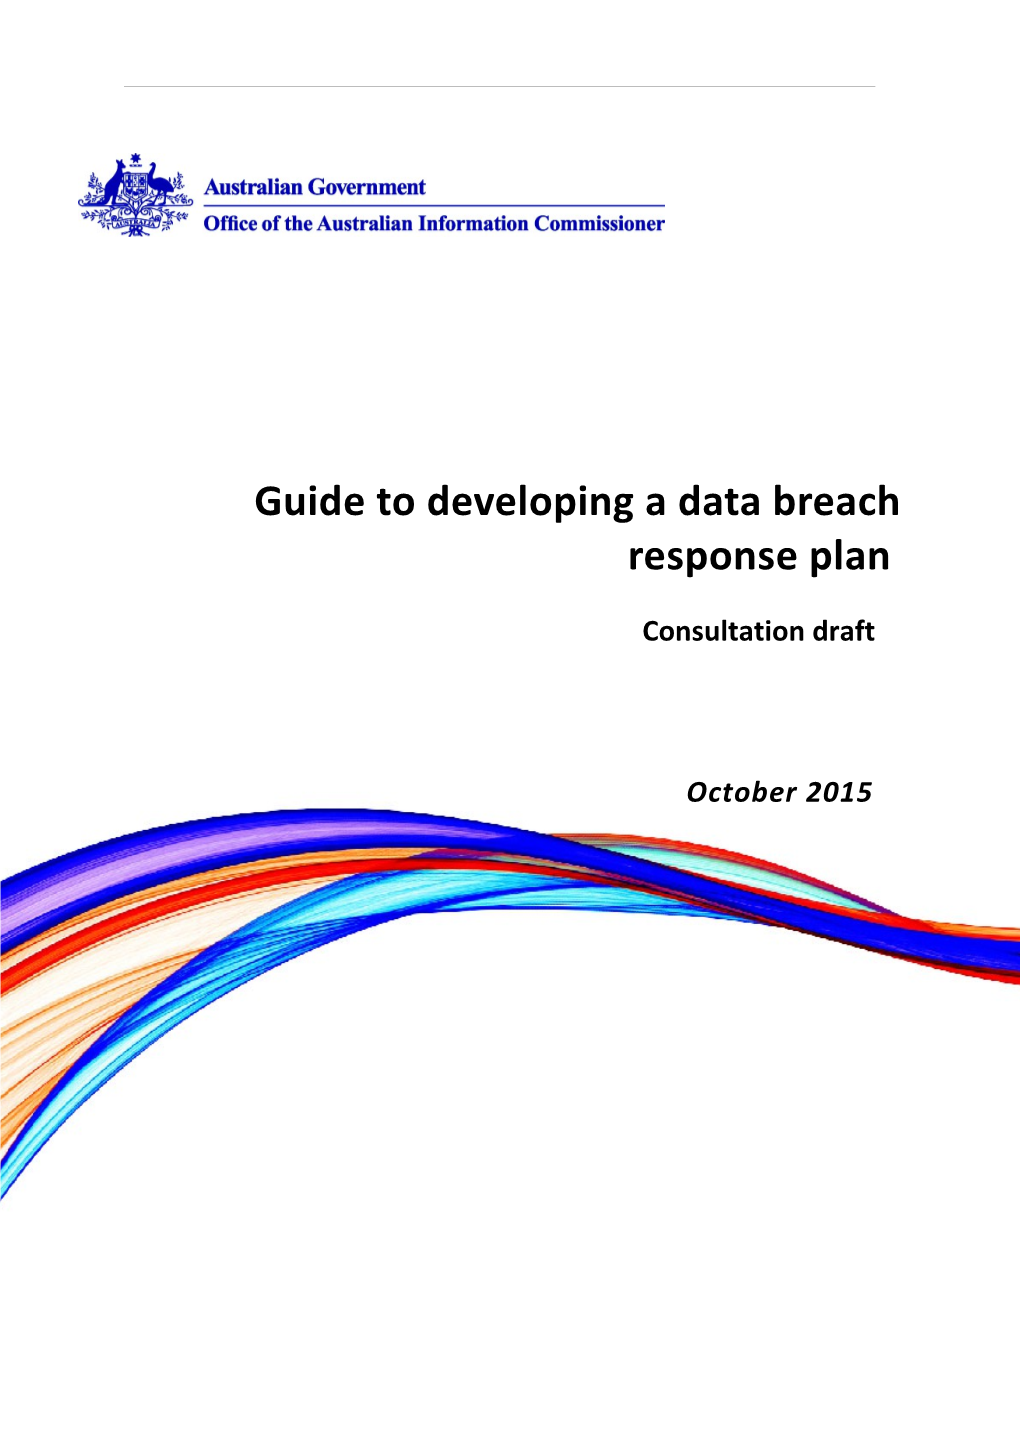 Guide to Developing a Data Breach Response Plan